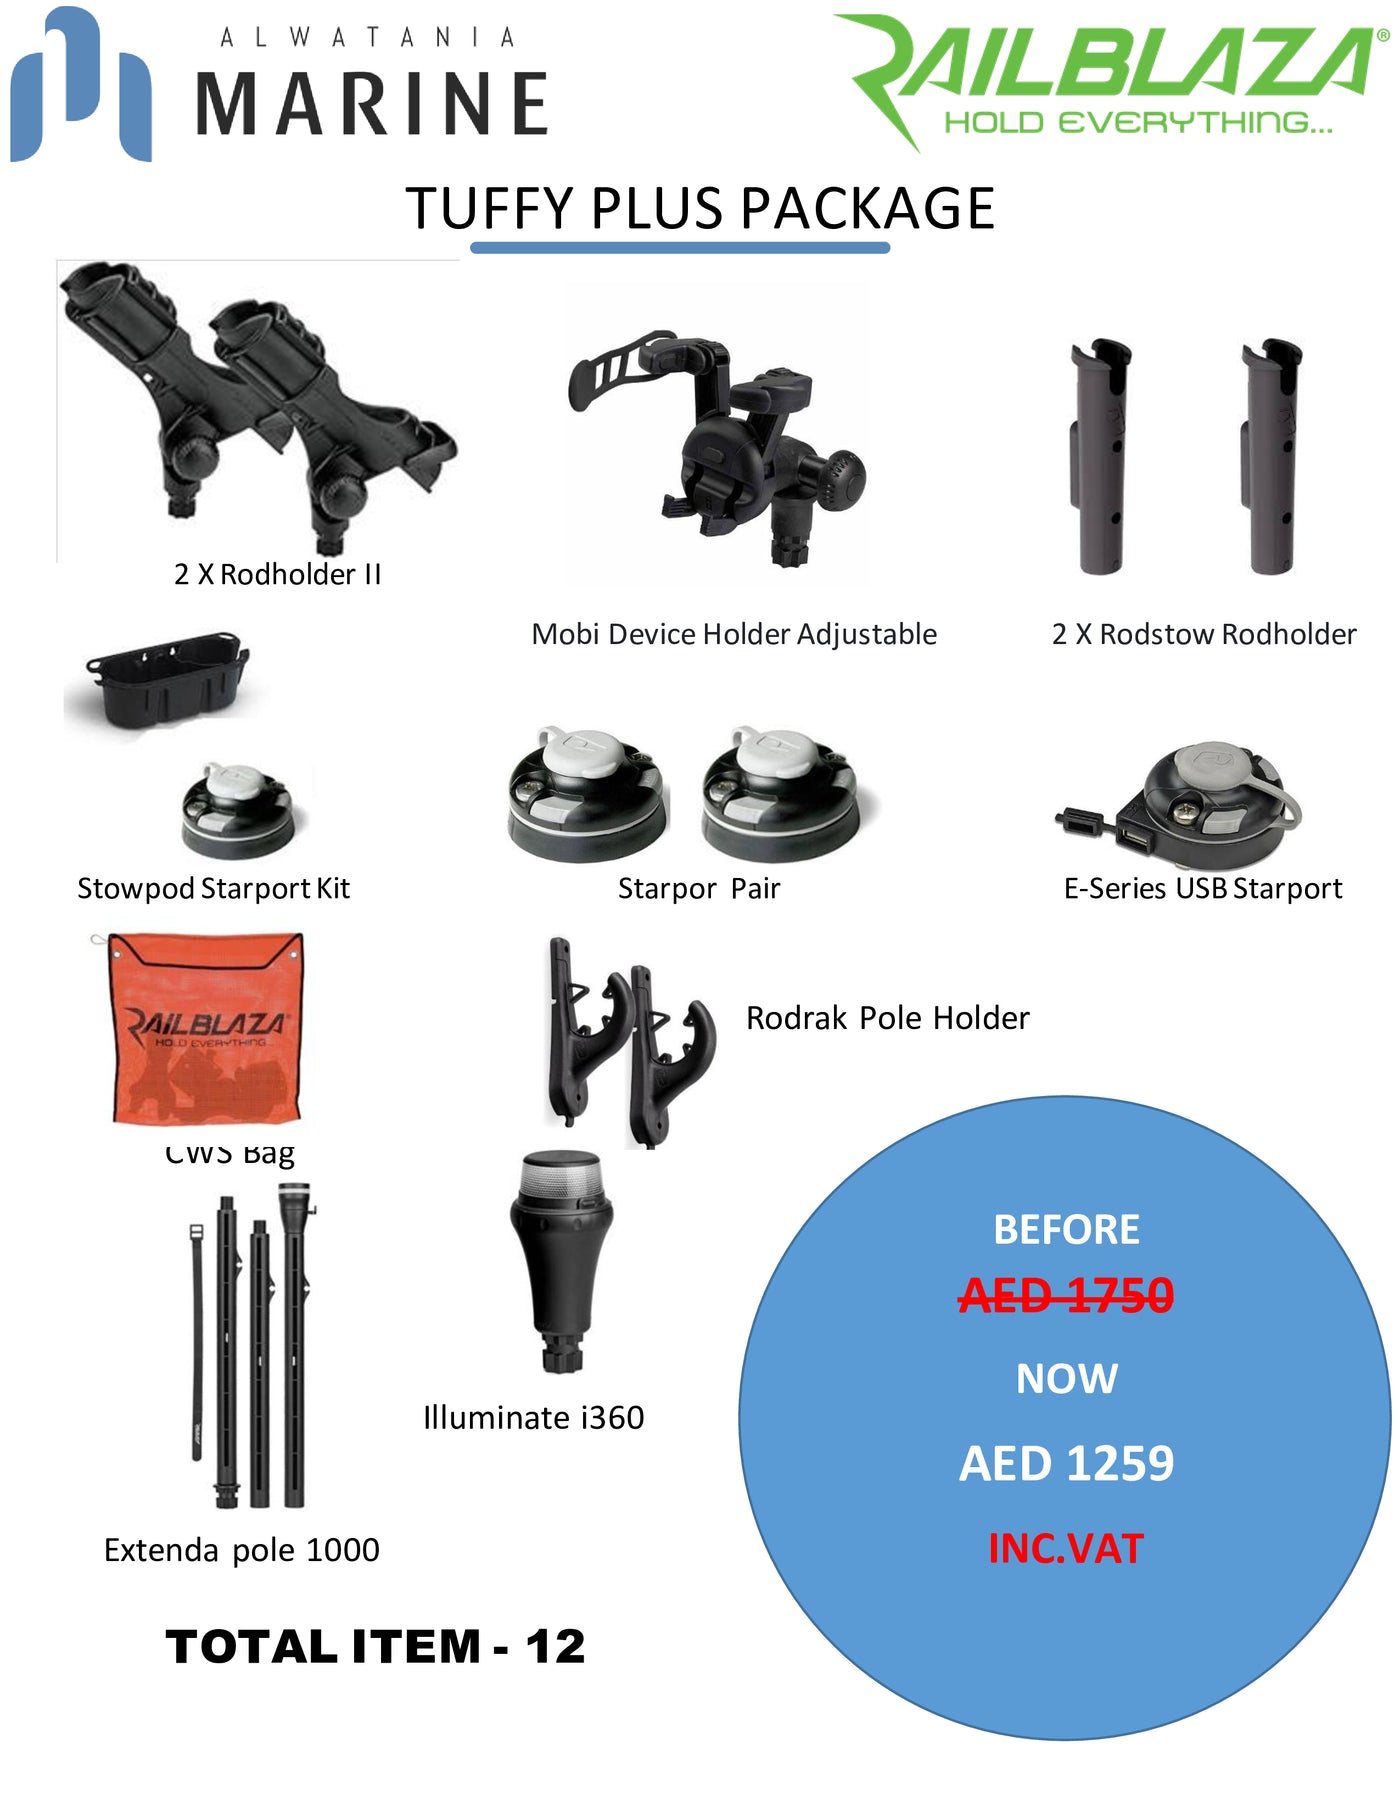 Tuffy Plus Package for Boats